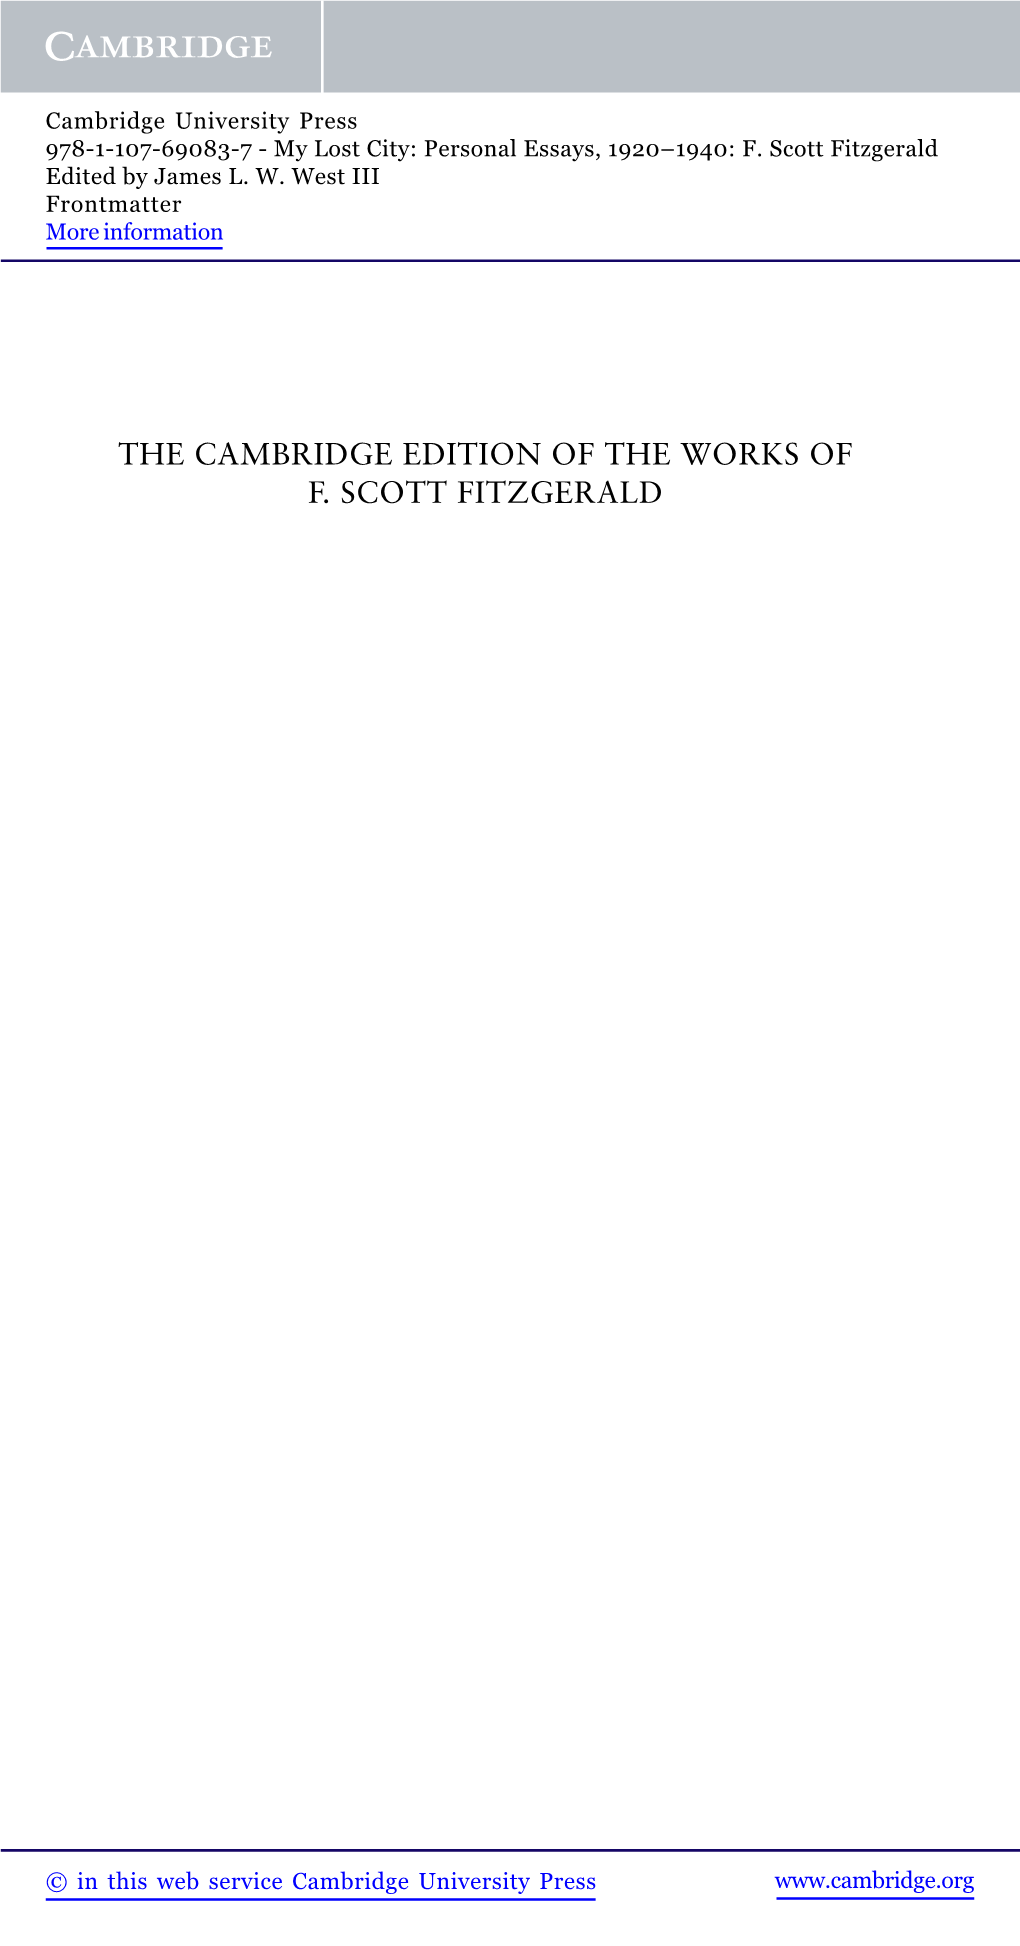 The Cambridge Edition of the Works of F. Scott Fitzgerald